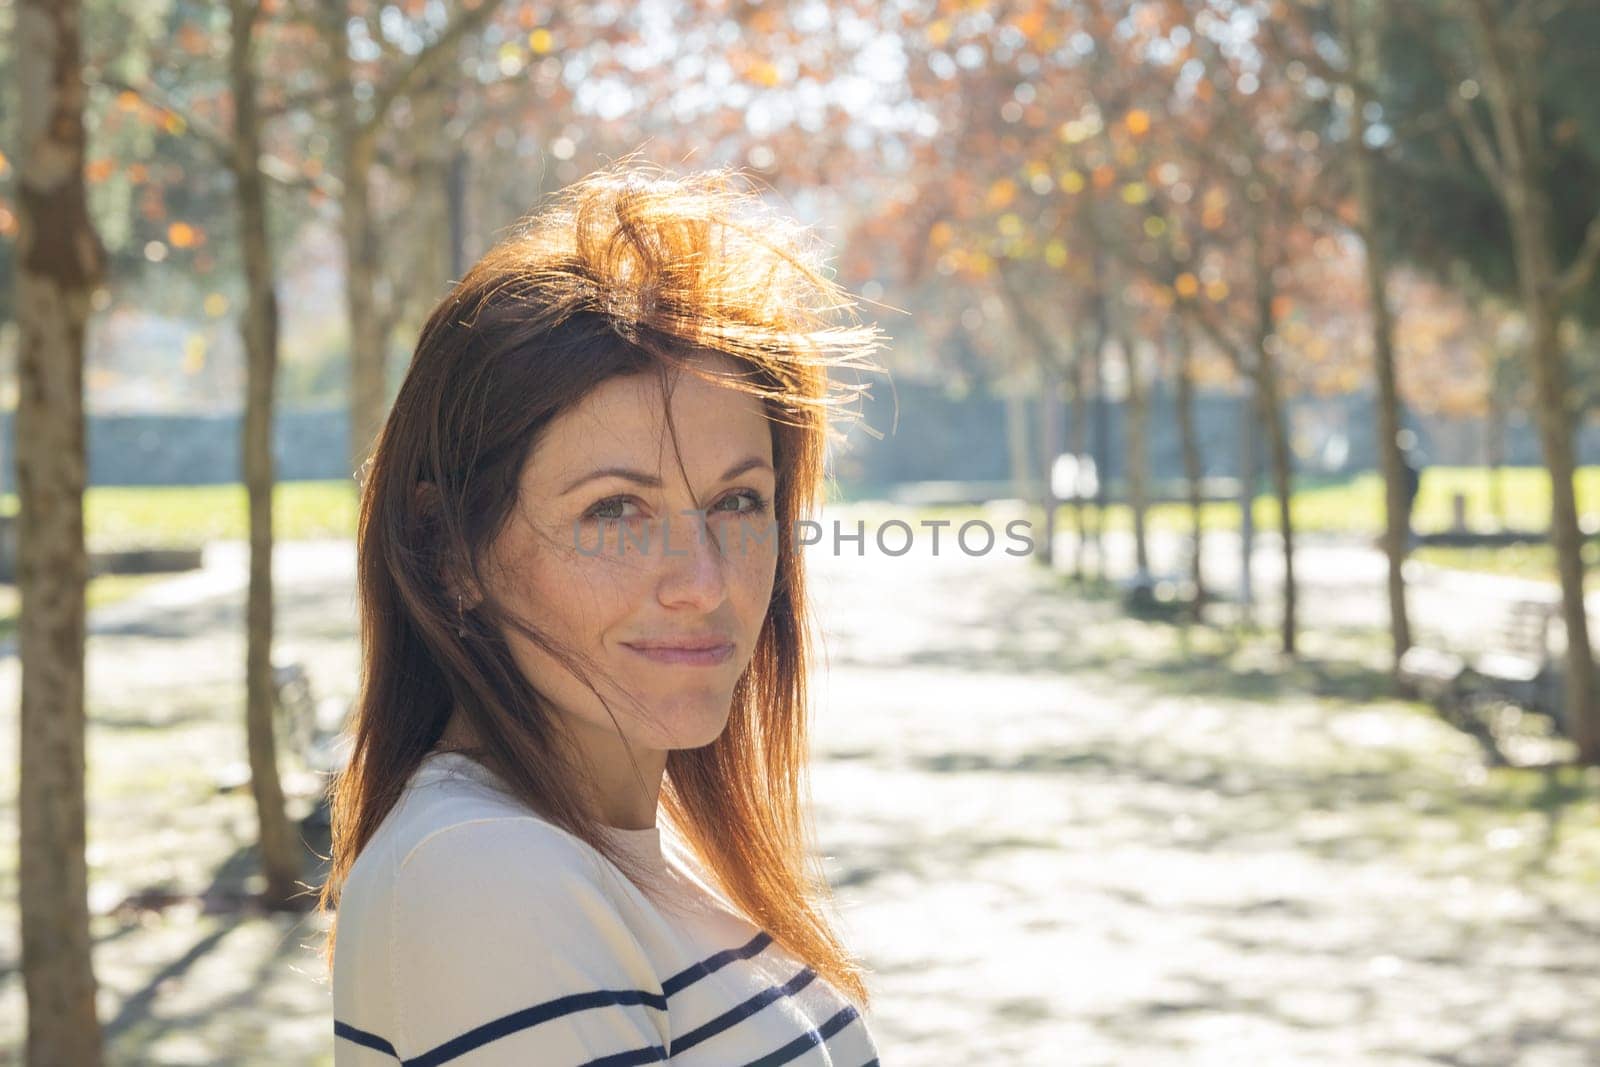 A woman with red hair is standing in a park. She is smiling and looking at the camera